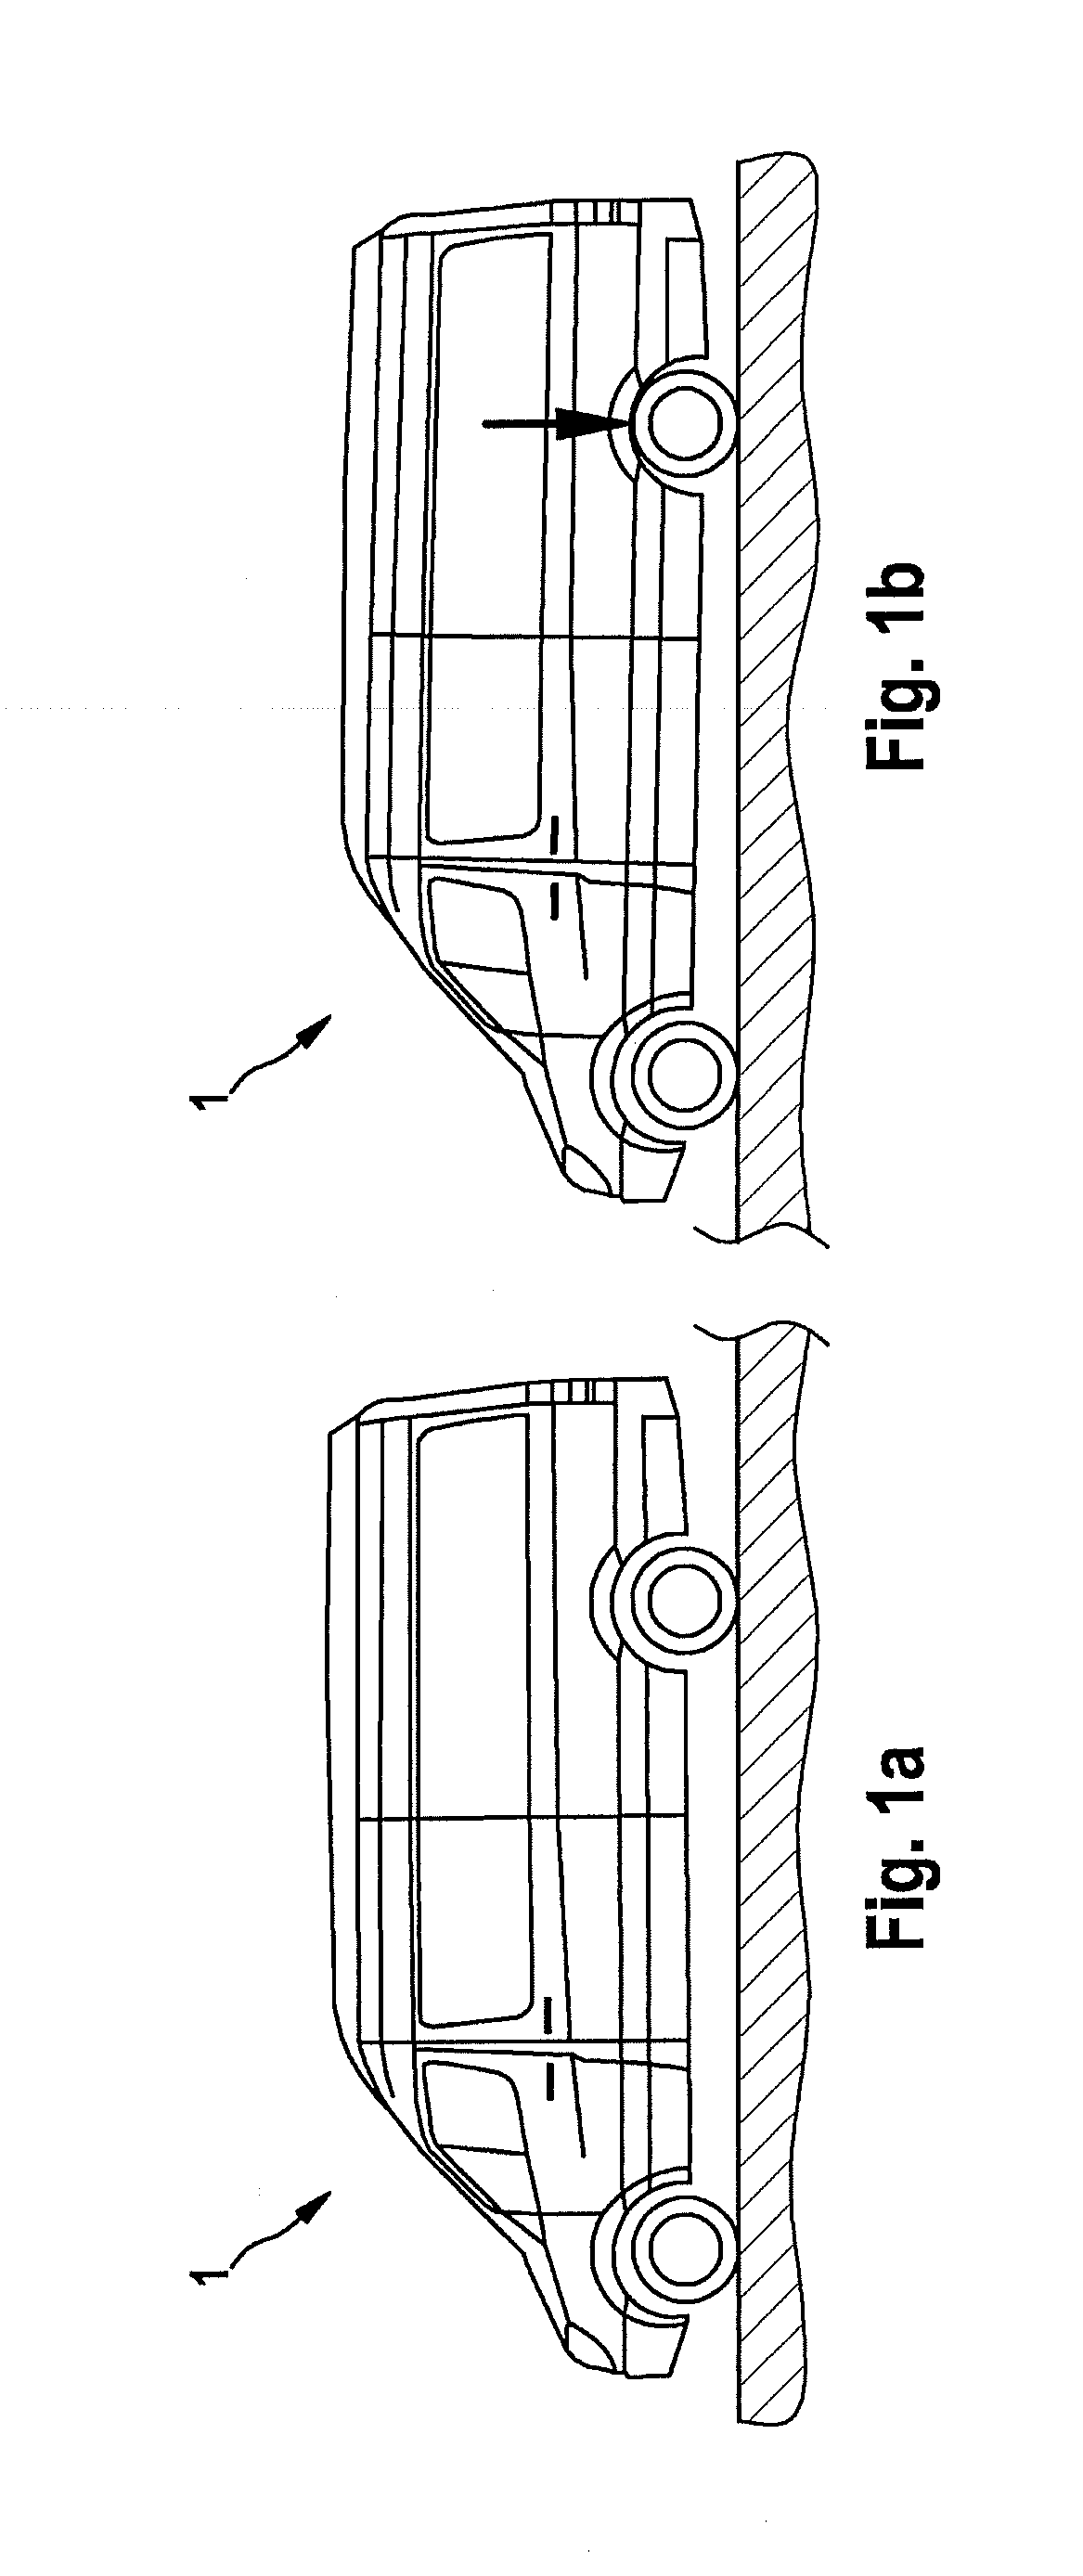 Method and devices for detecting and rectifying problems in connection with a vehicle load